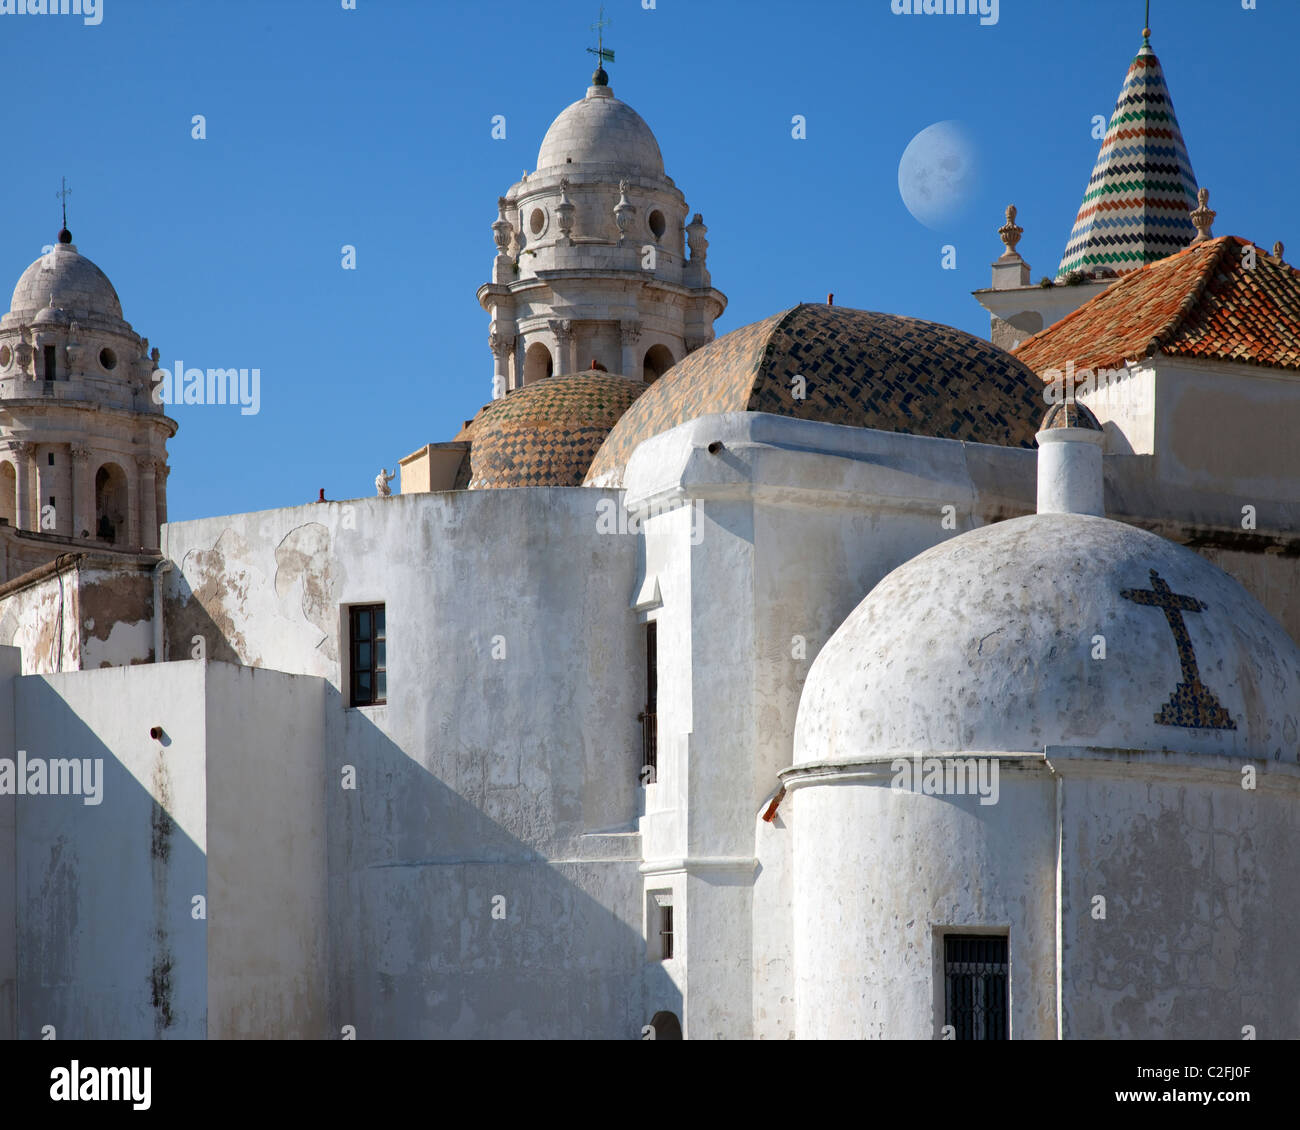 ES - ANDALUSIA: Cadiz city detail showing cathedral Stock Photo